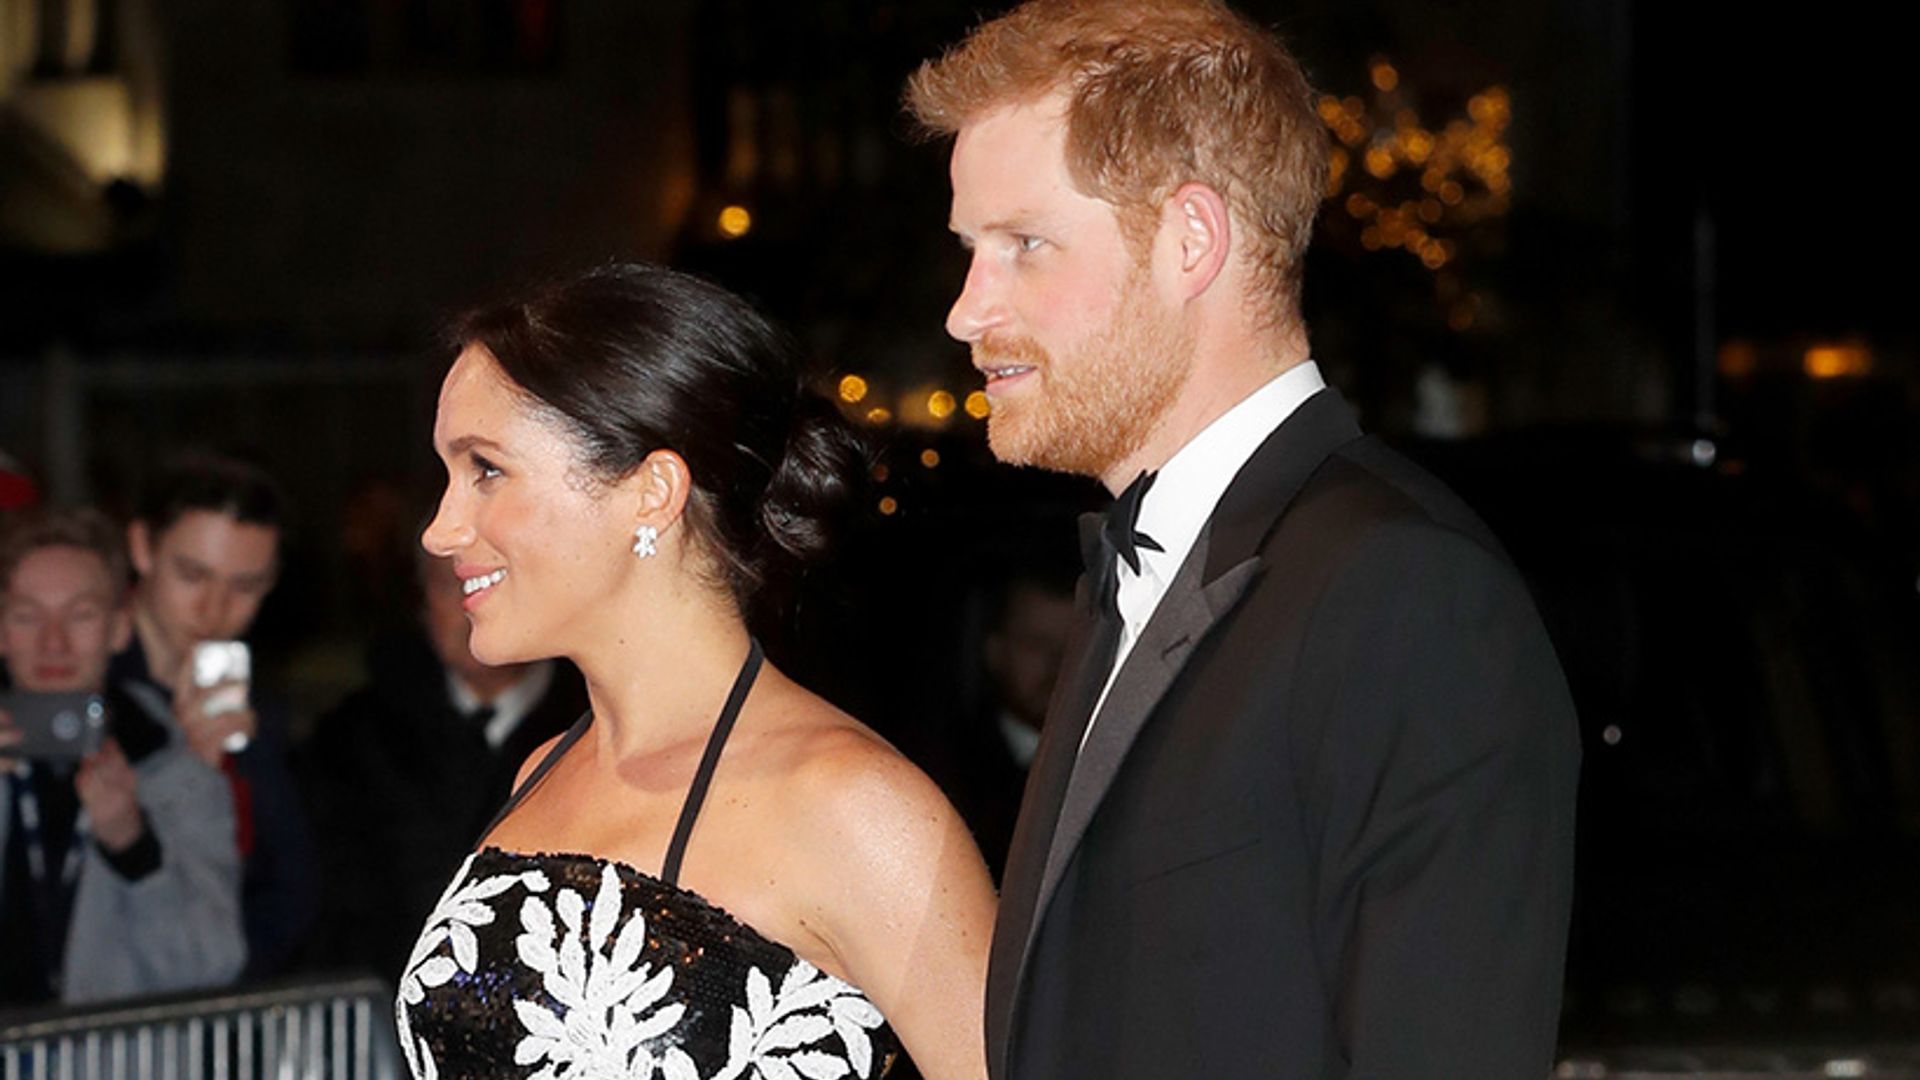 All the best photos from Meghan Markle's first ever Royal Variety Performance with Prince Harry  